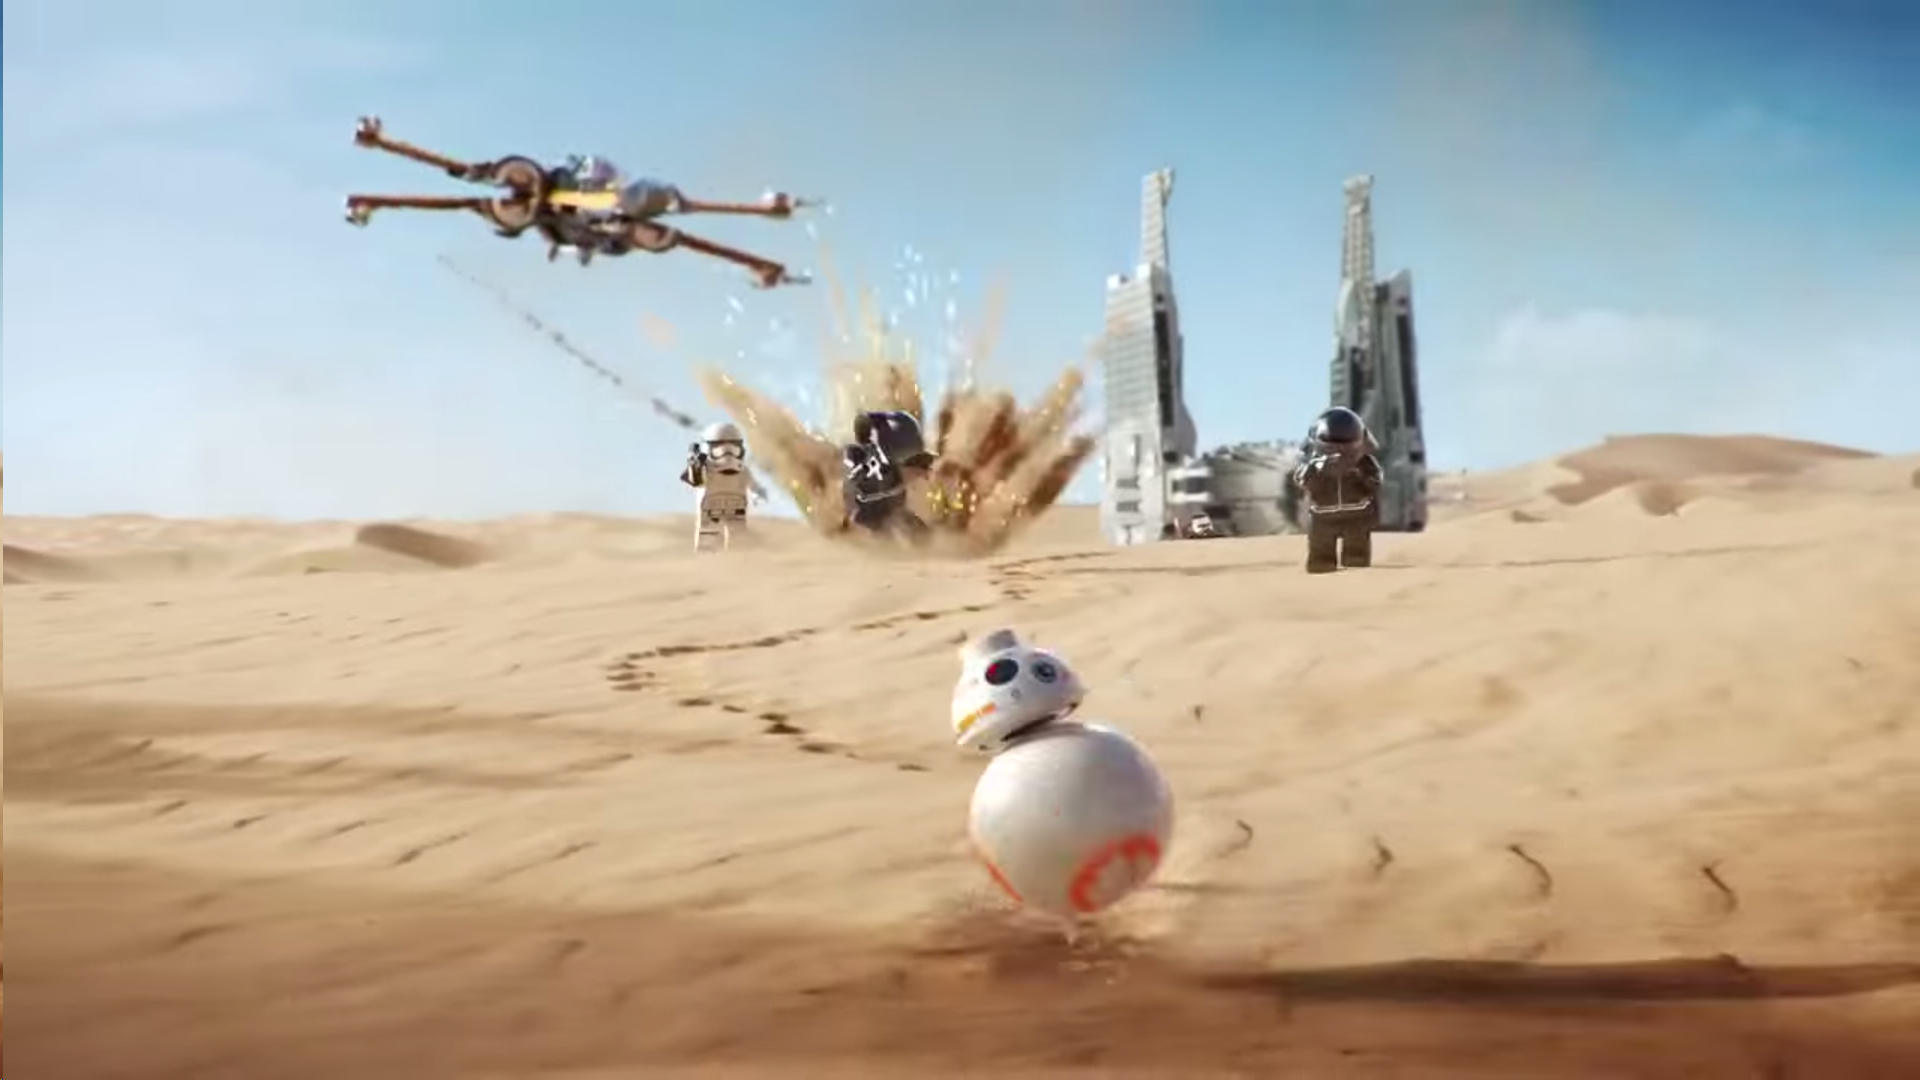 Star Wars: Force Awakens - Does This LEGO Commercial Give Away What Happens on Jakku?